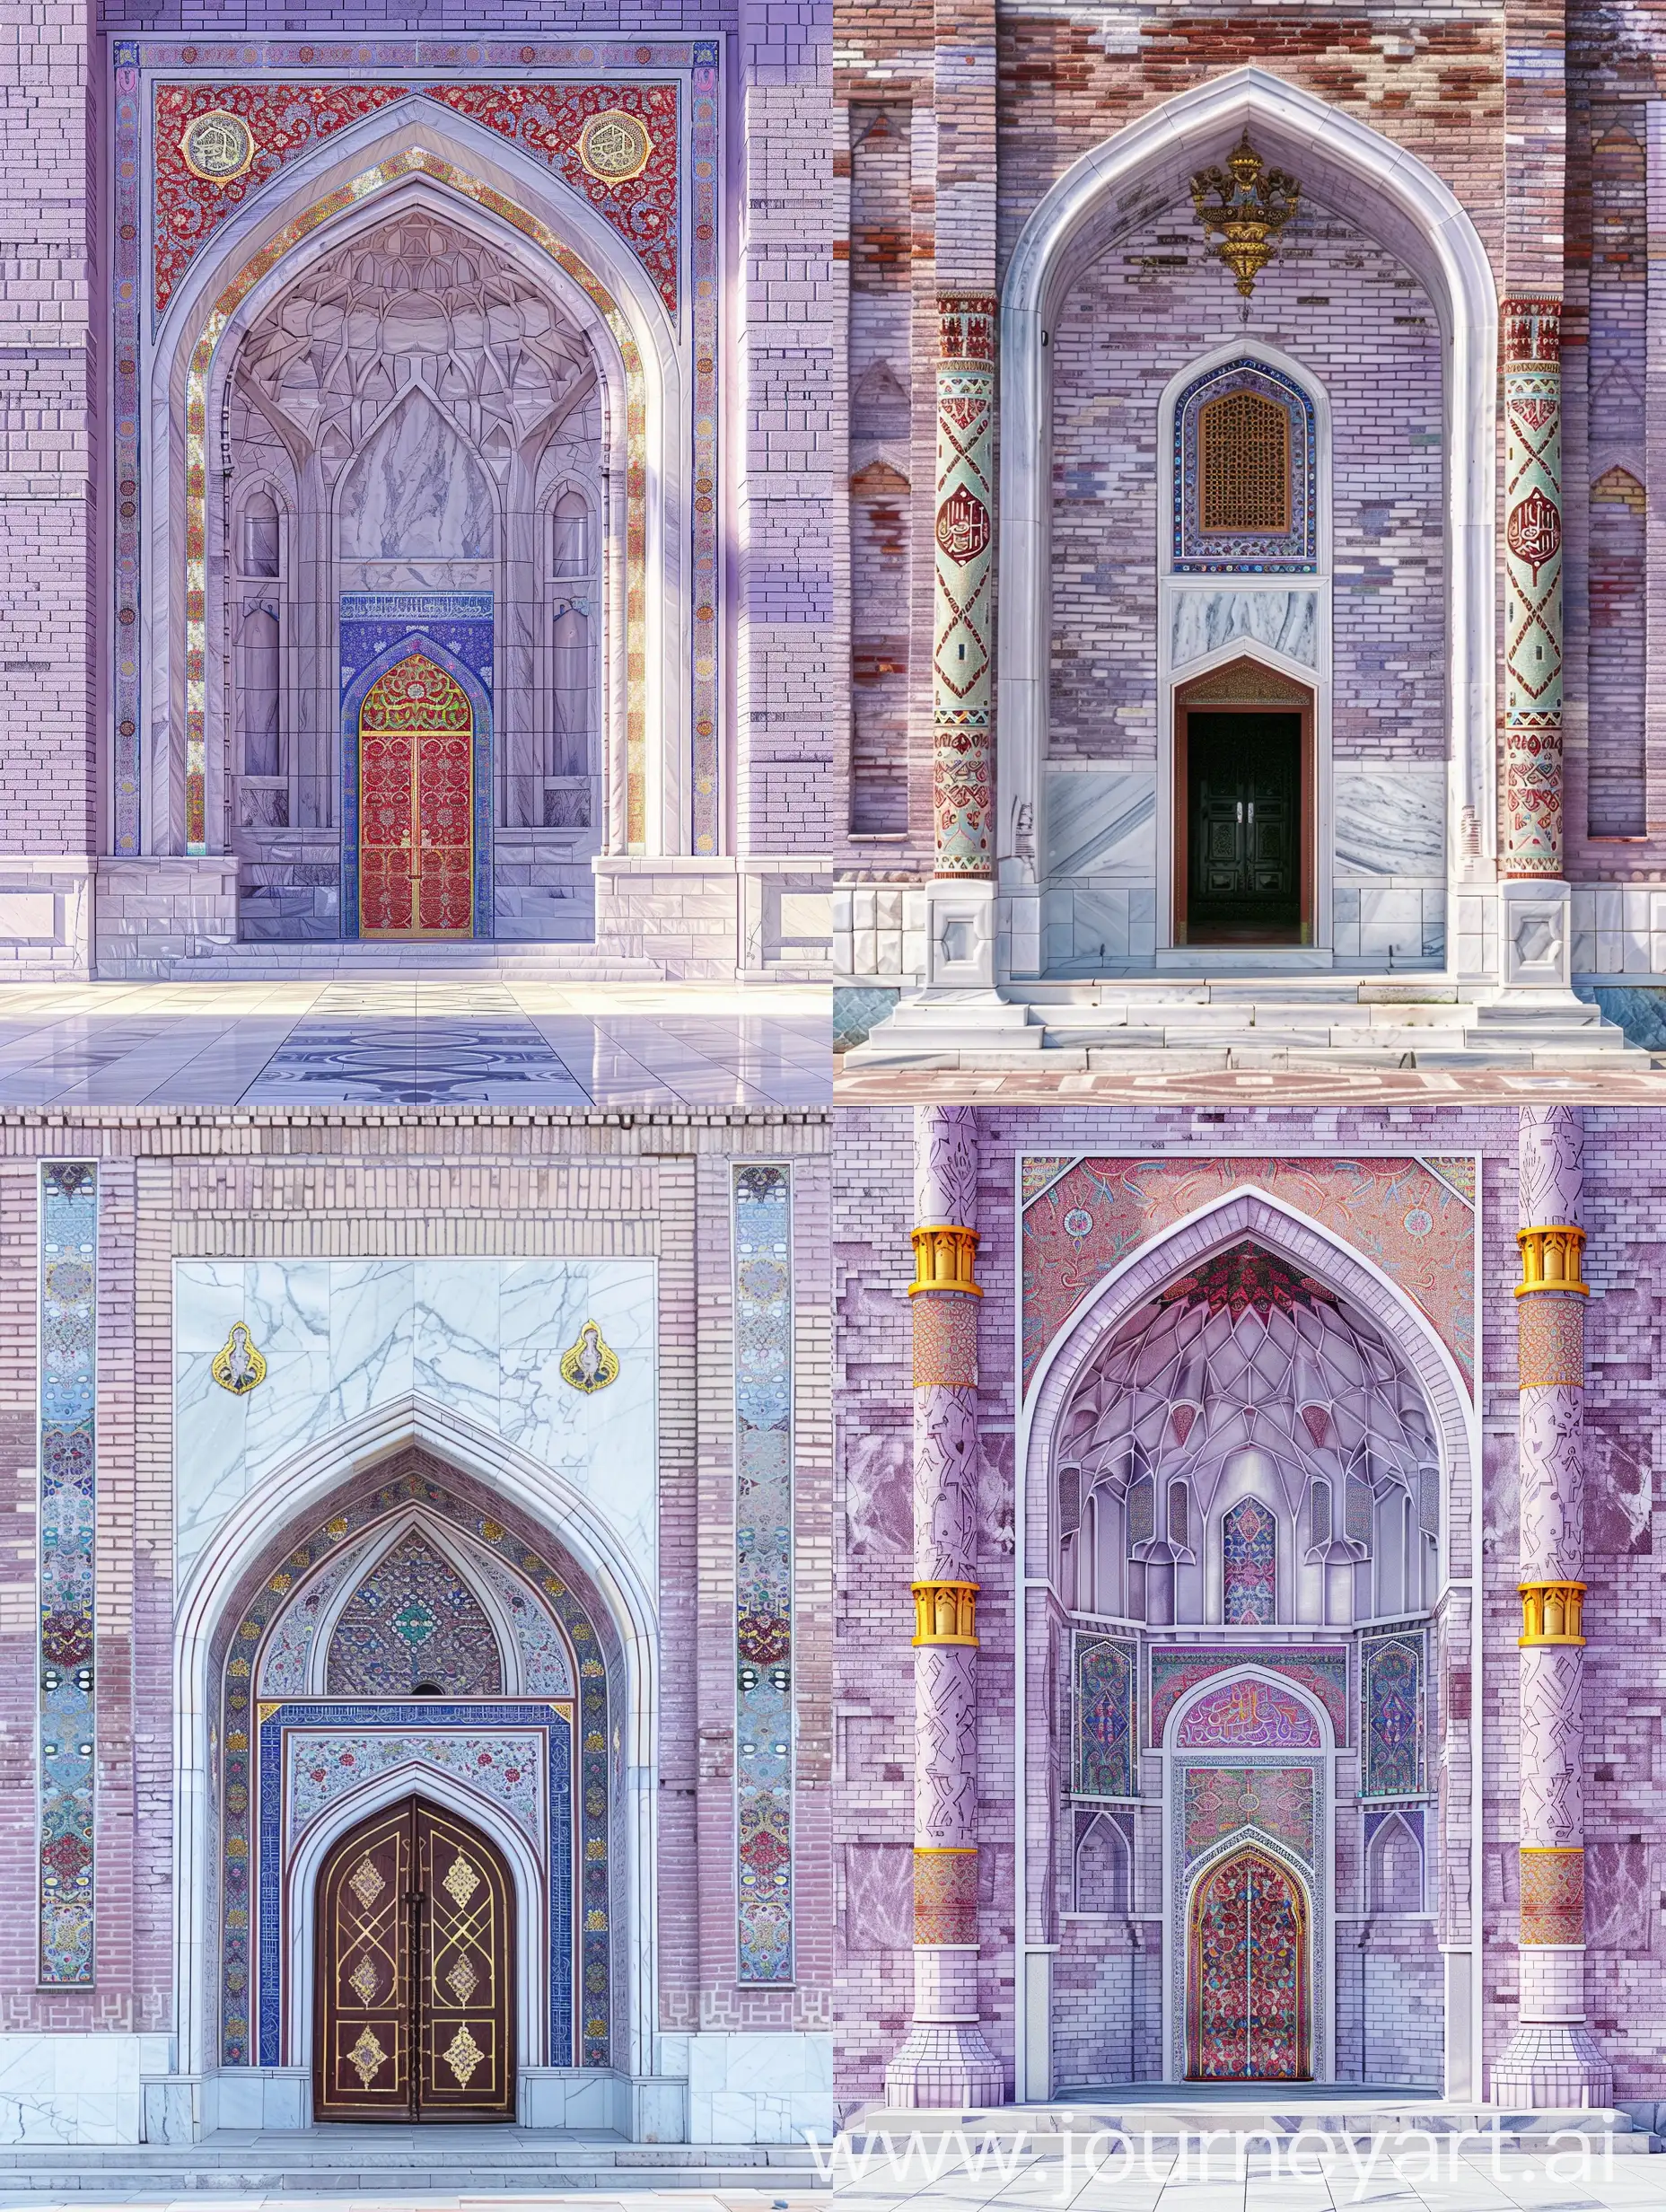 Lavender color brick marbled mosque, Uzbekistan Timurid influences, Tall iwan, red blue persian design on white spandrels, shiny golden ornaments 